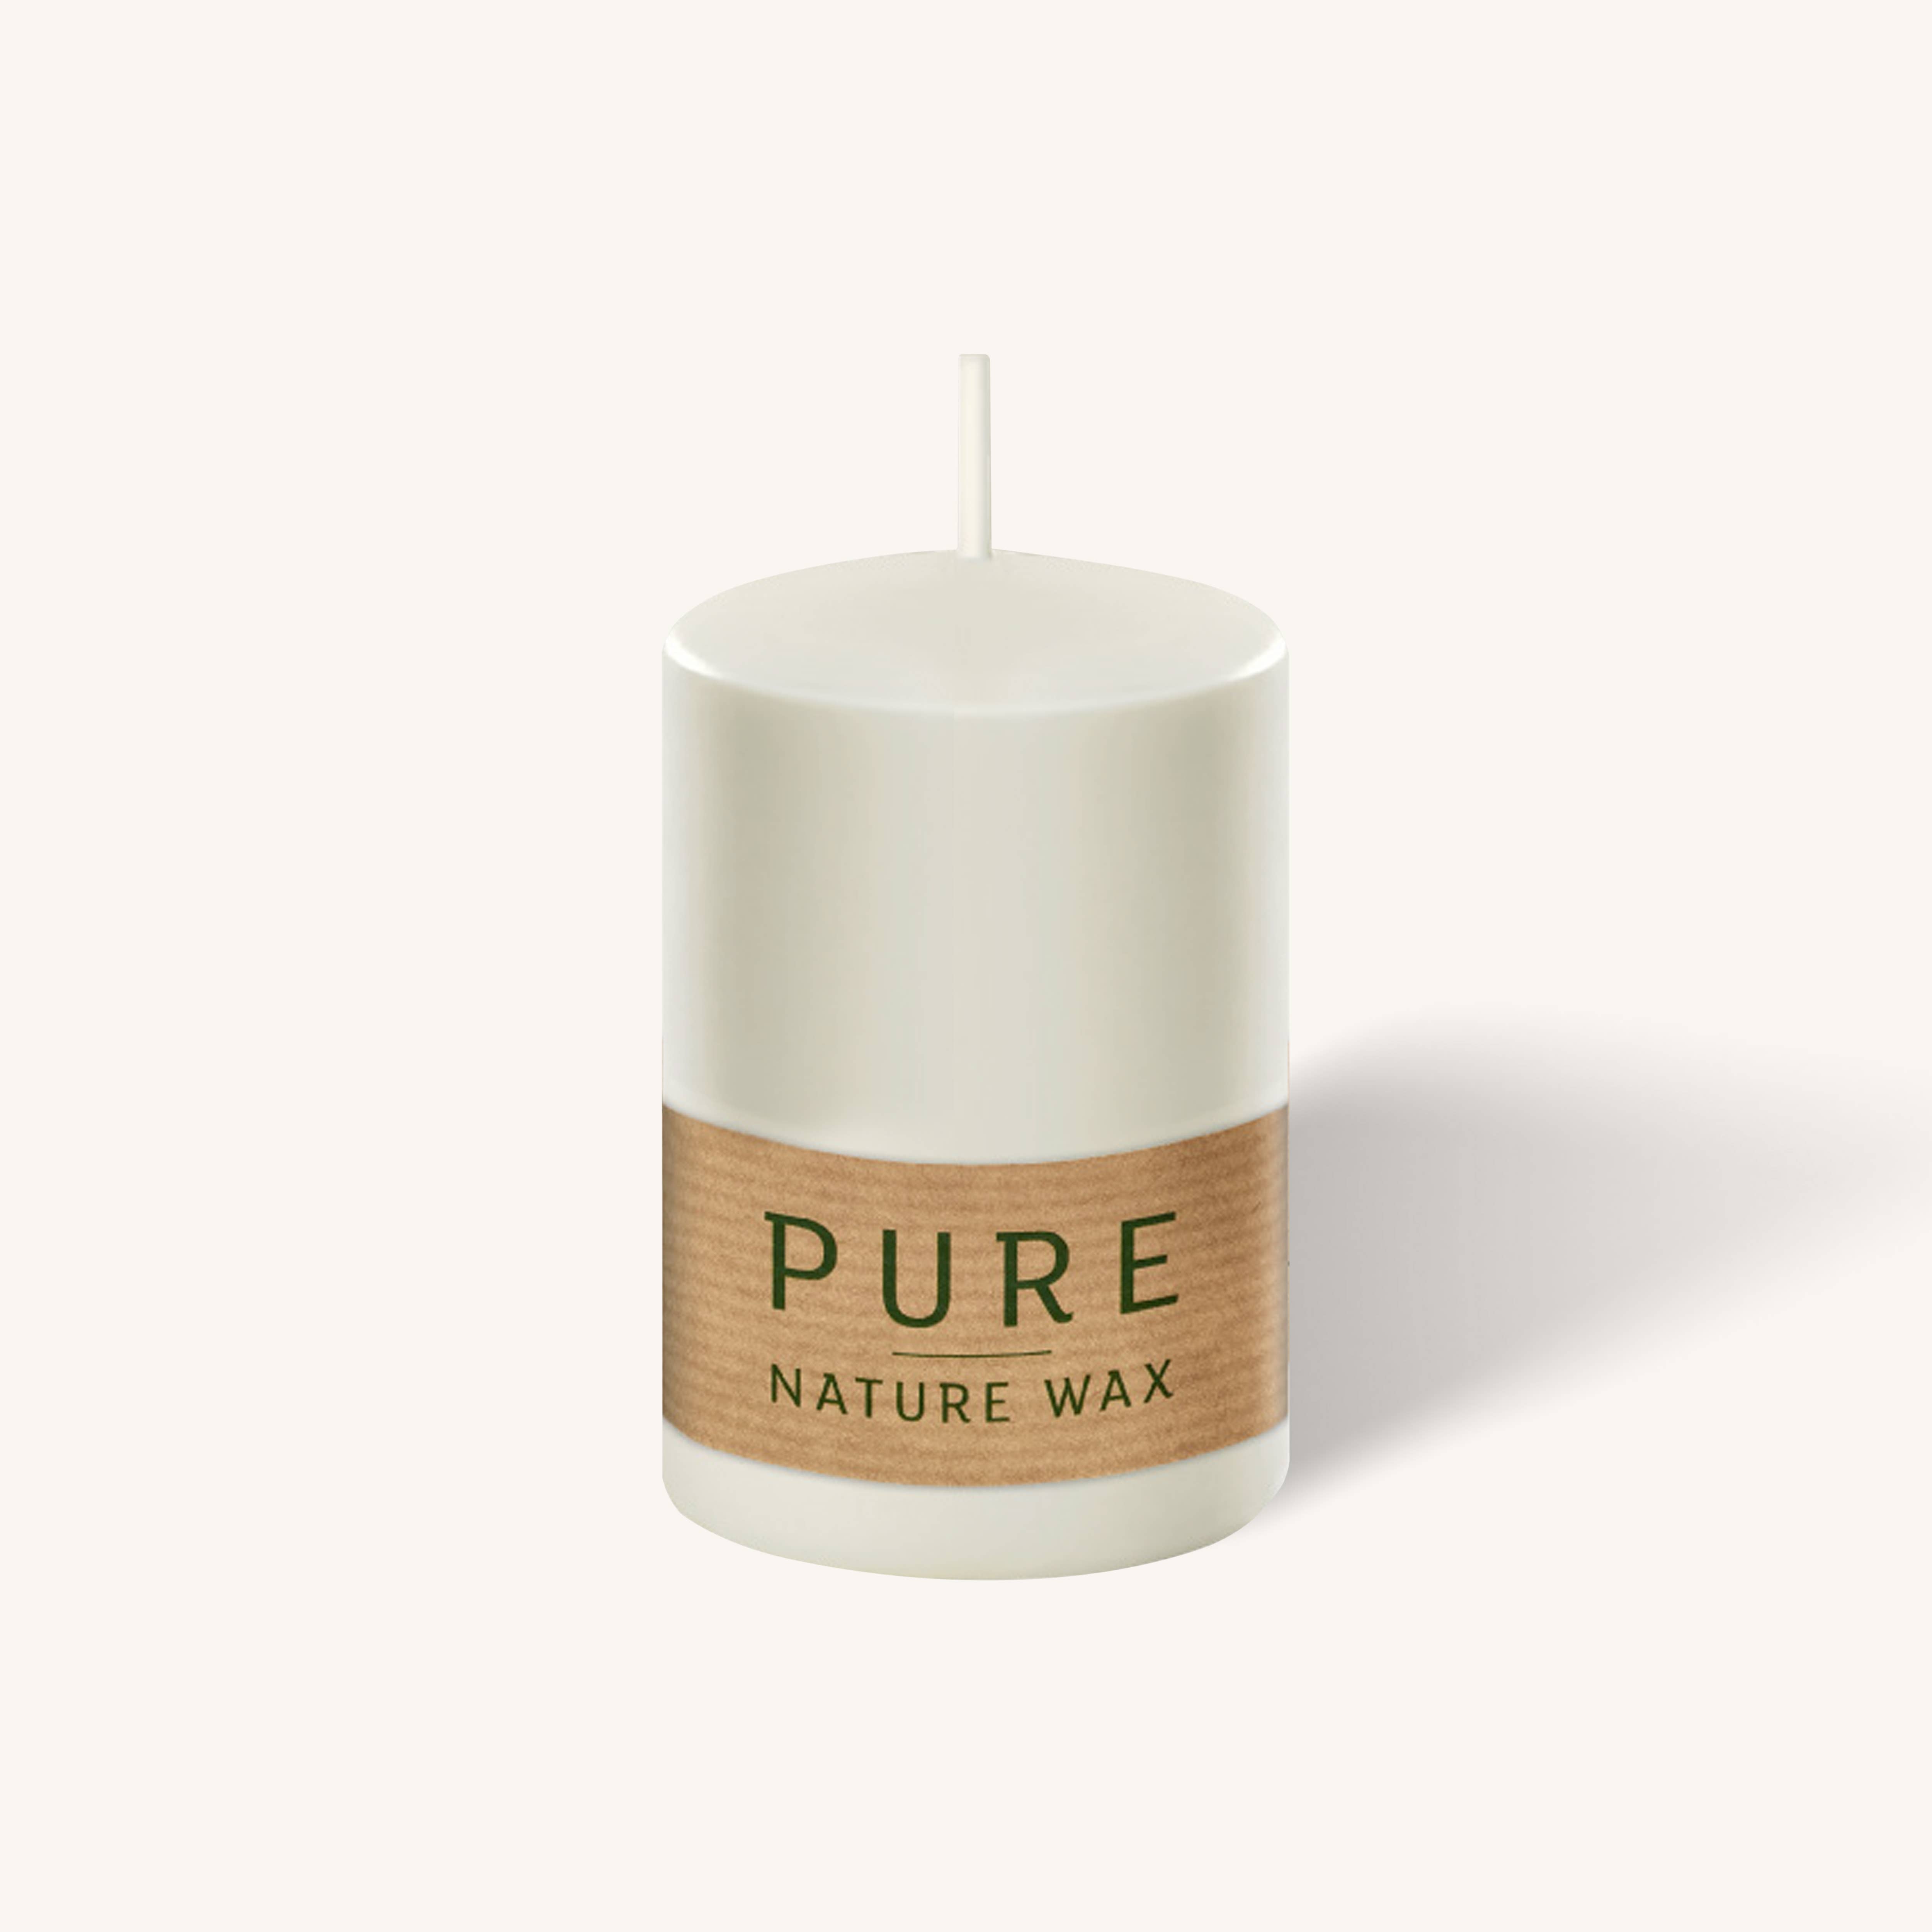 Pure Nature Wax White Pillar Candle - 2.3" x 3.5" - 4 Pack